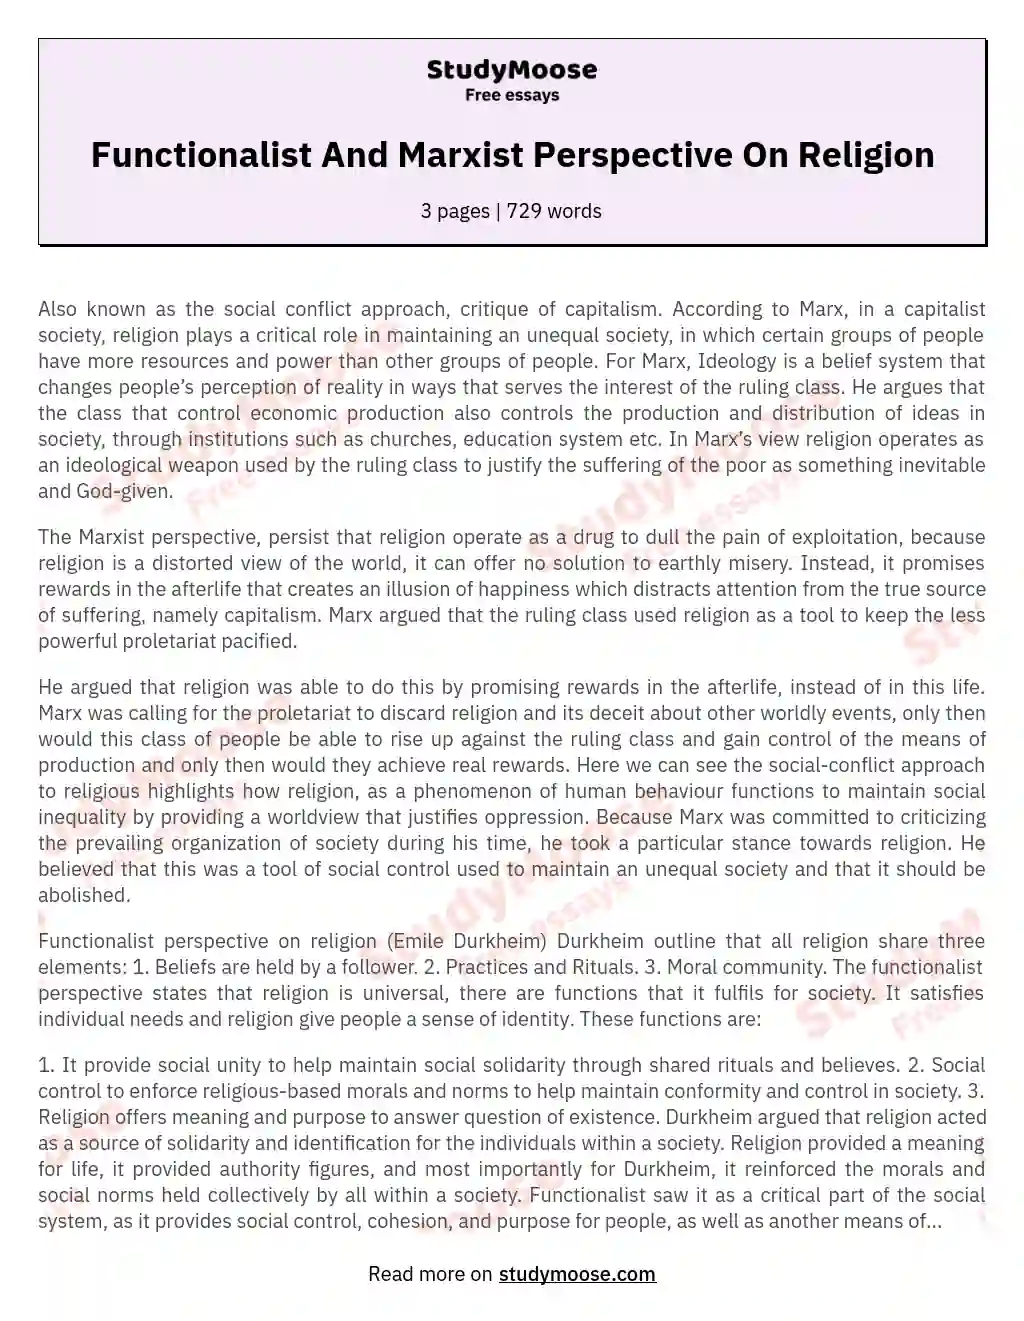 functionalist view on religion essay